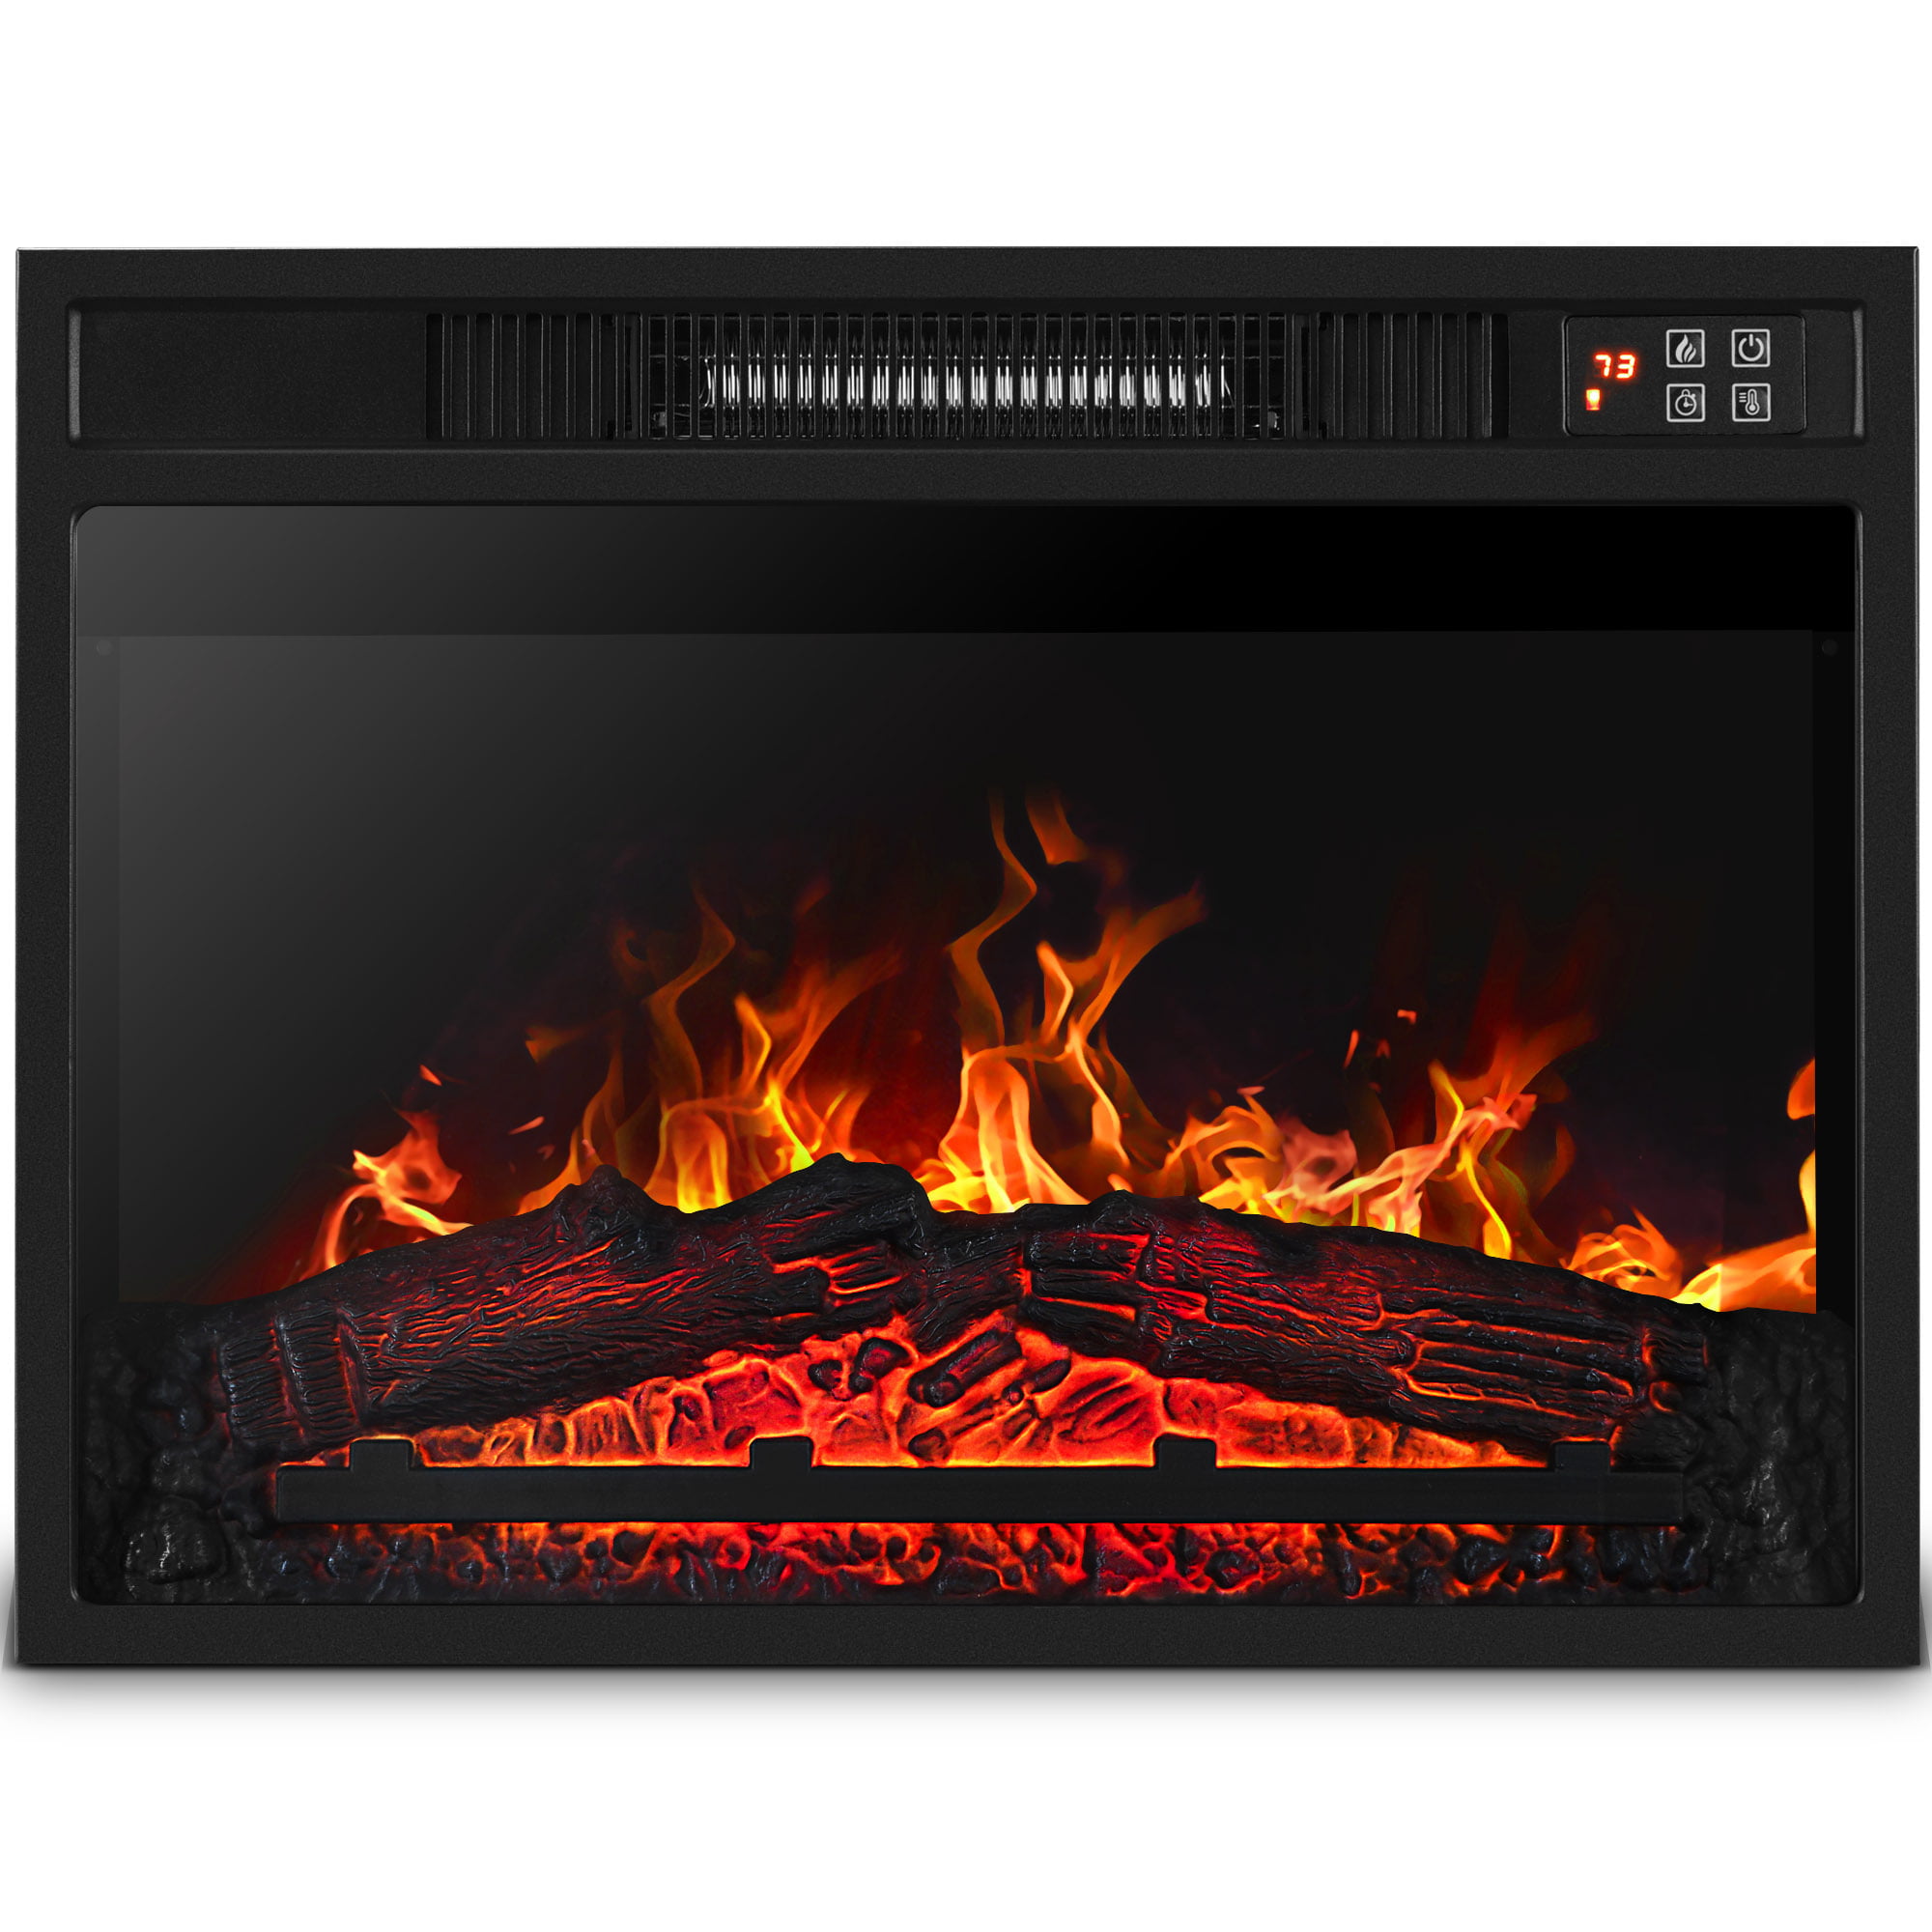 Della 1400w Embedded Fireplace Electric, Fireplace Log Insert With Heater